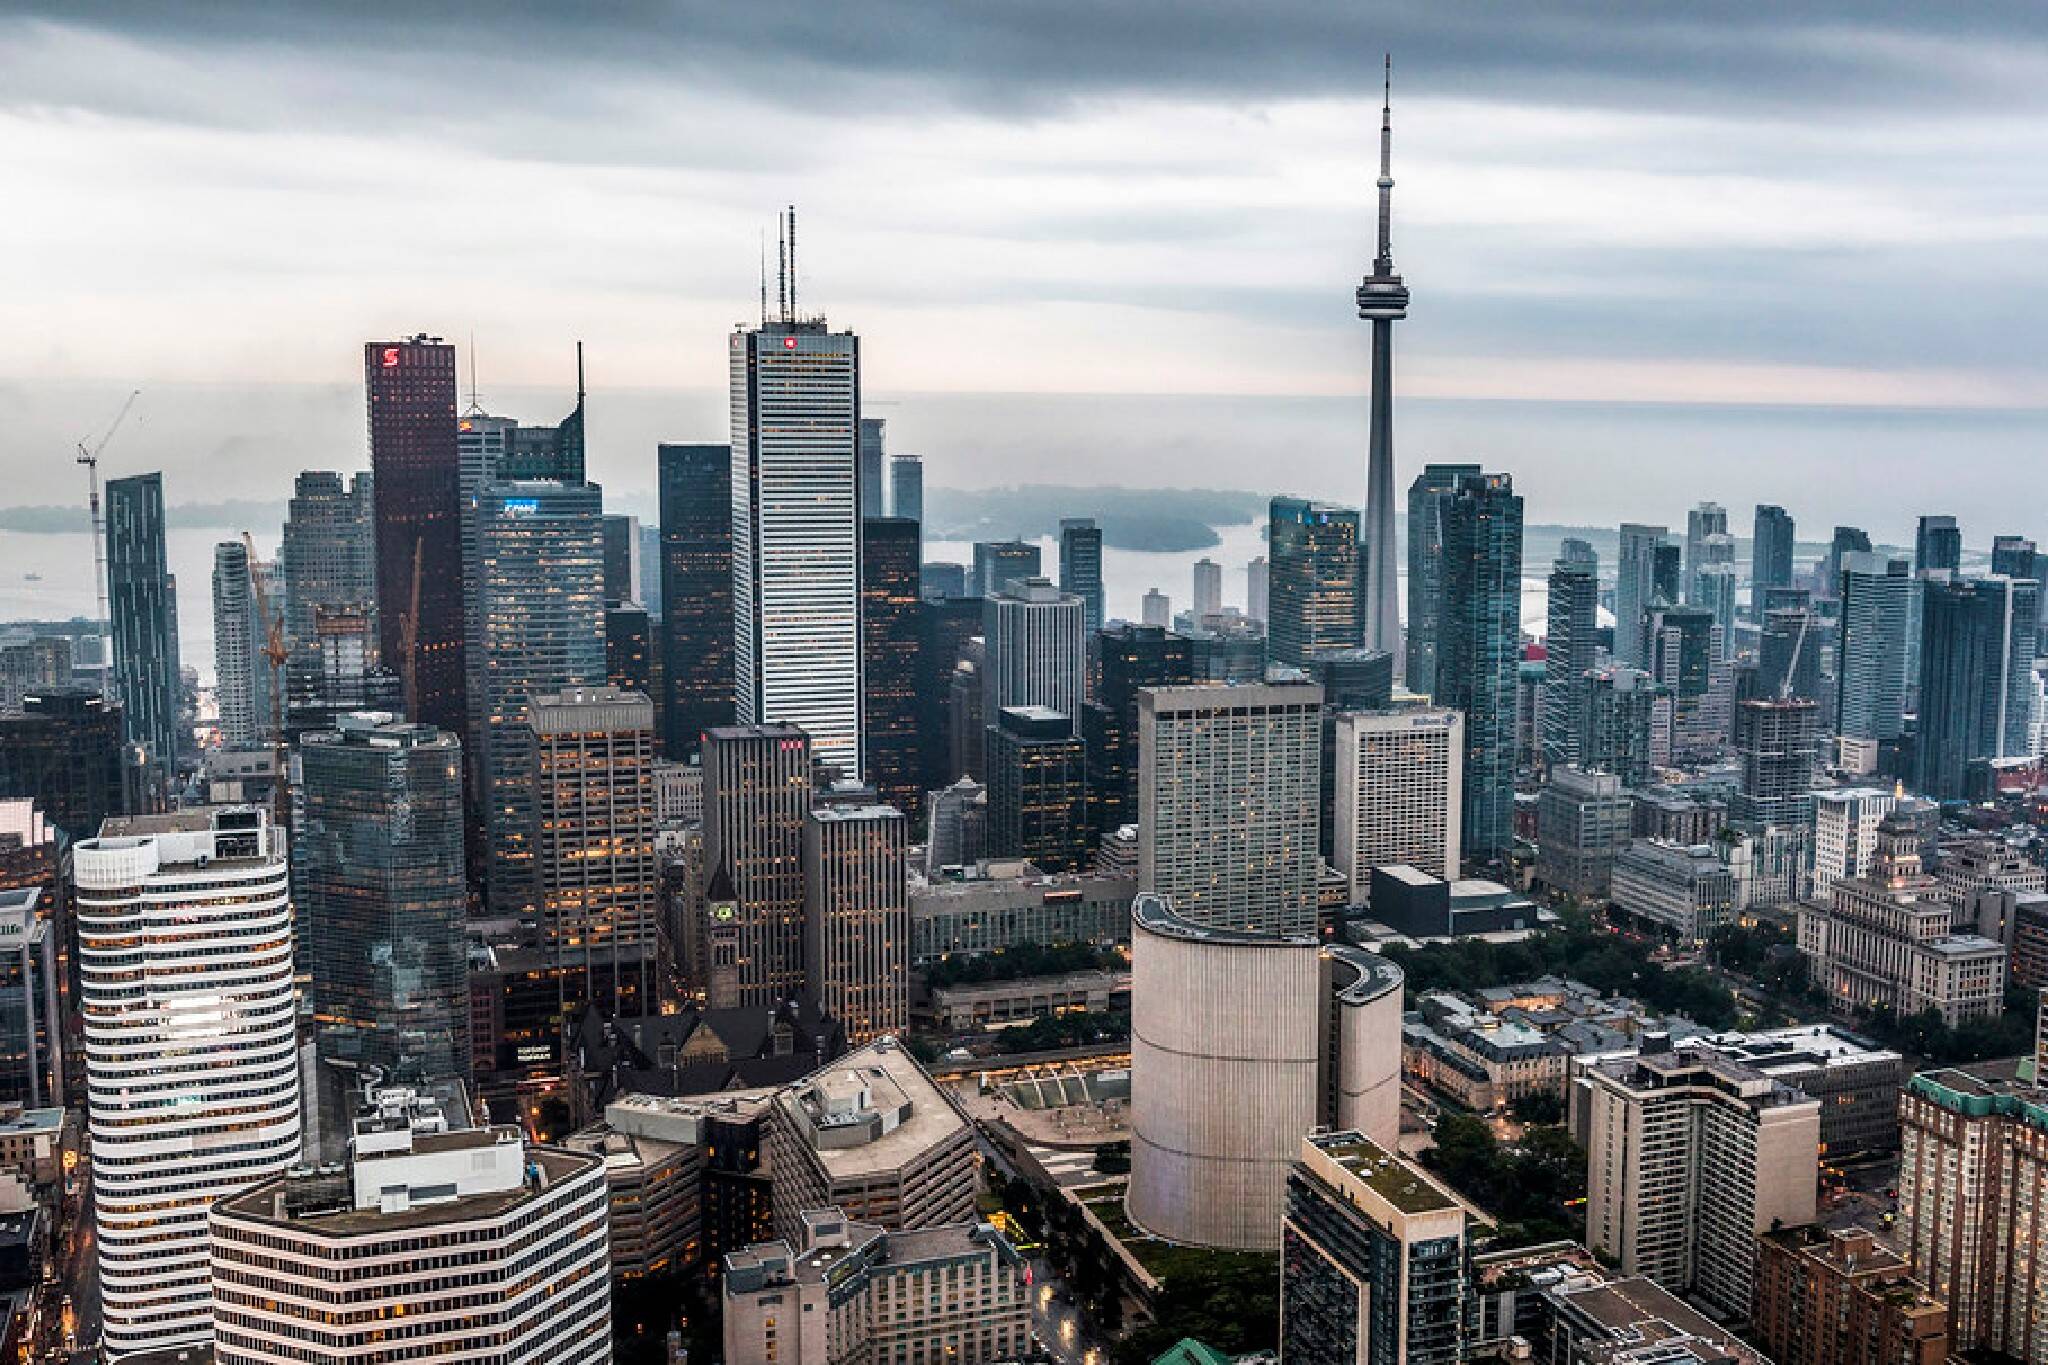 Toronto just broke a 25year temperature record for cold weather